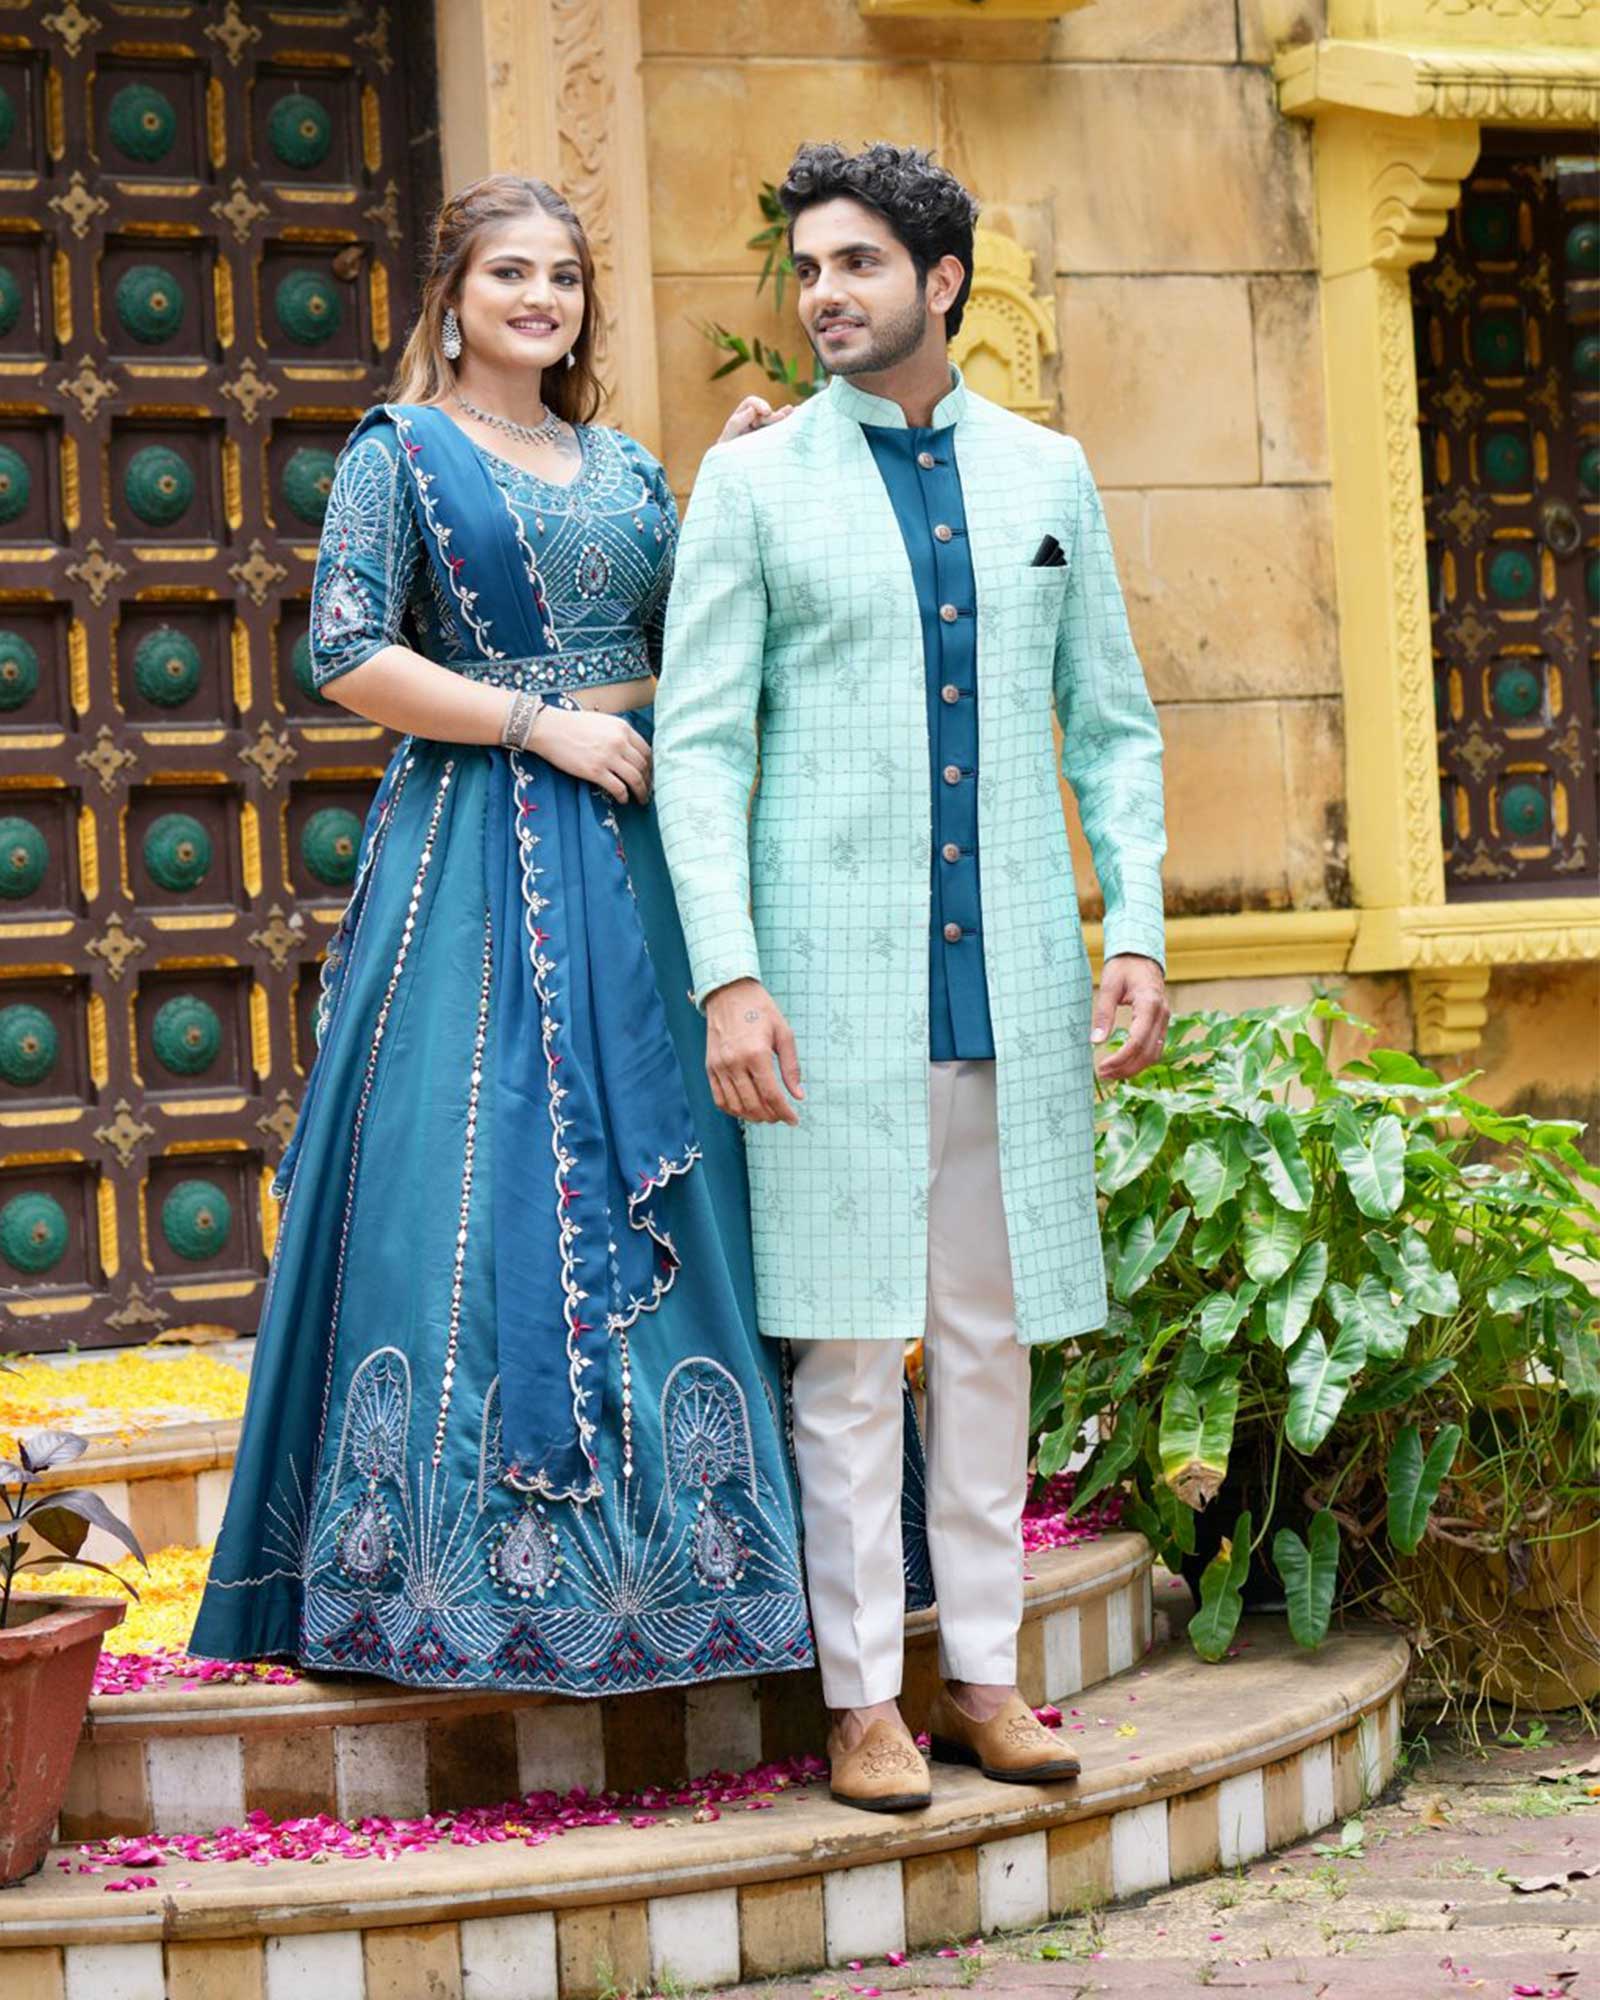 Couple outfits | Couple dress, Indian wedding outfits, Couple outfits